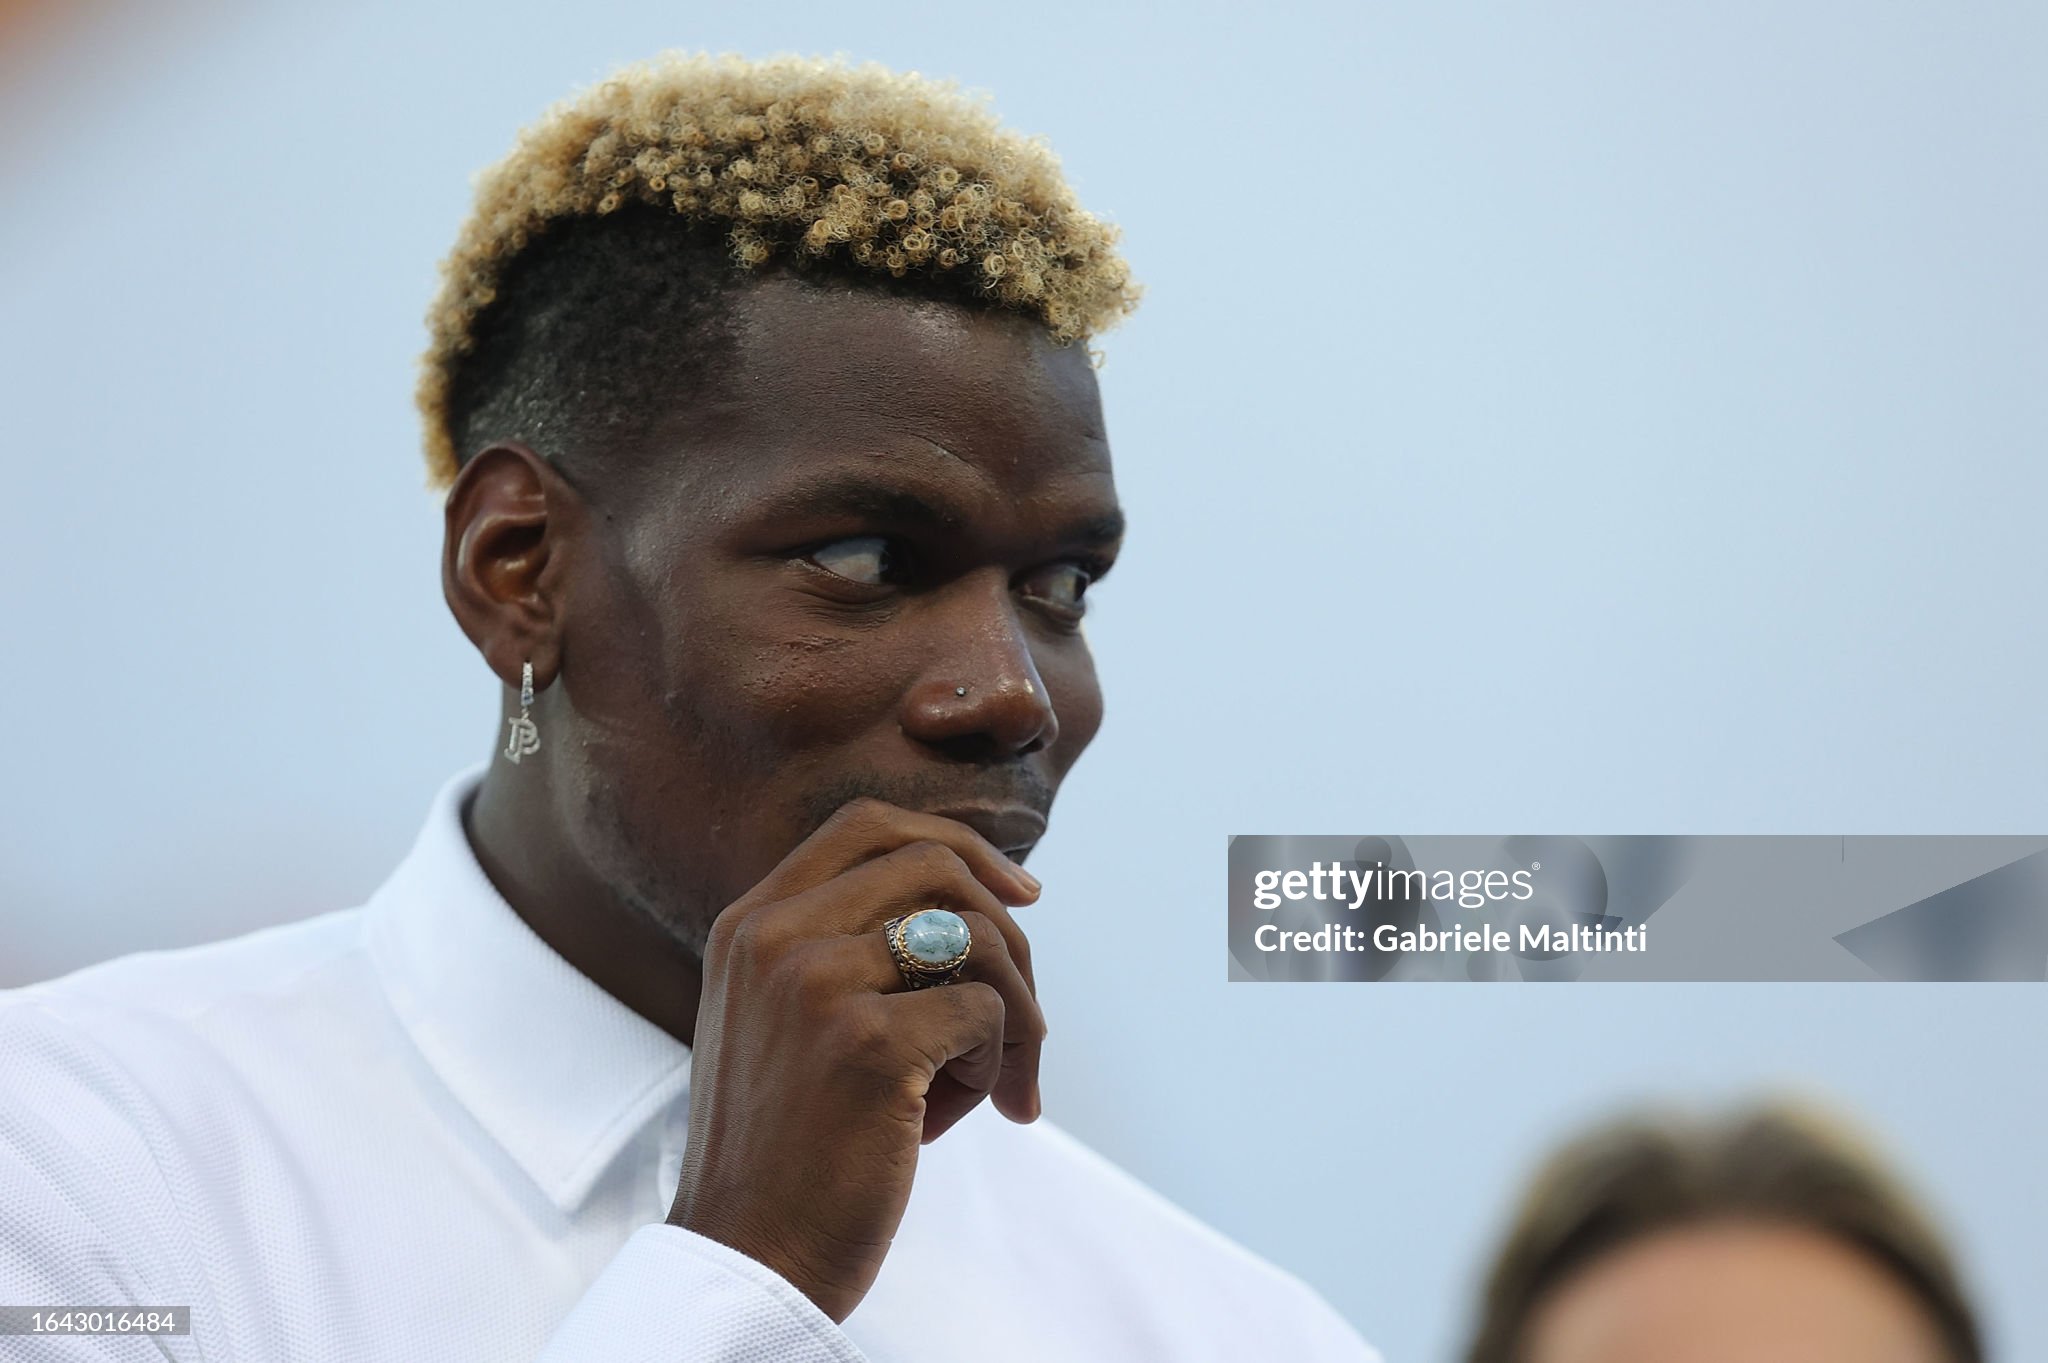 Despite the Threat of a Doping Ban, Pogba Remains Hopeful: 'He is Optimistic'